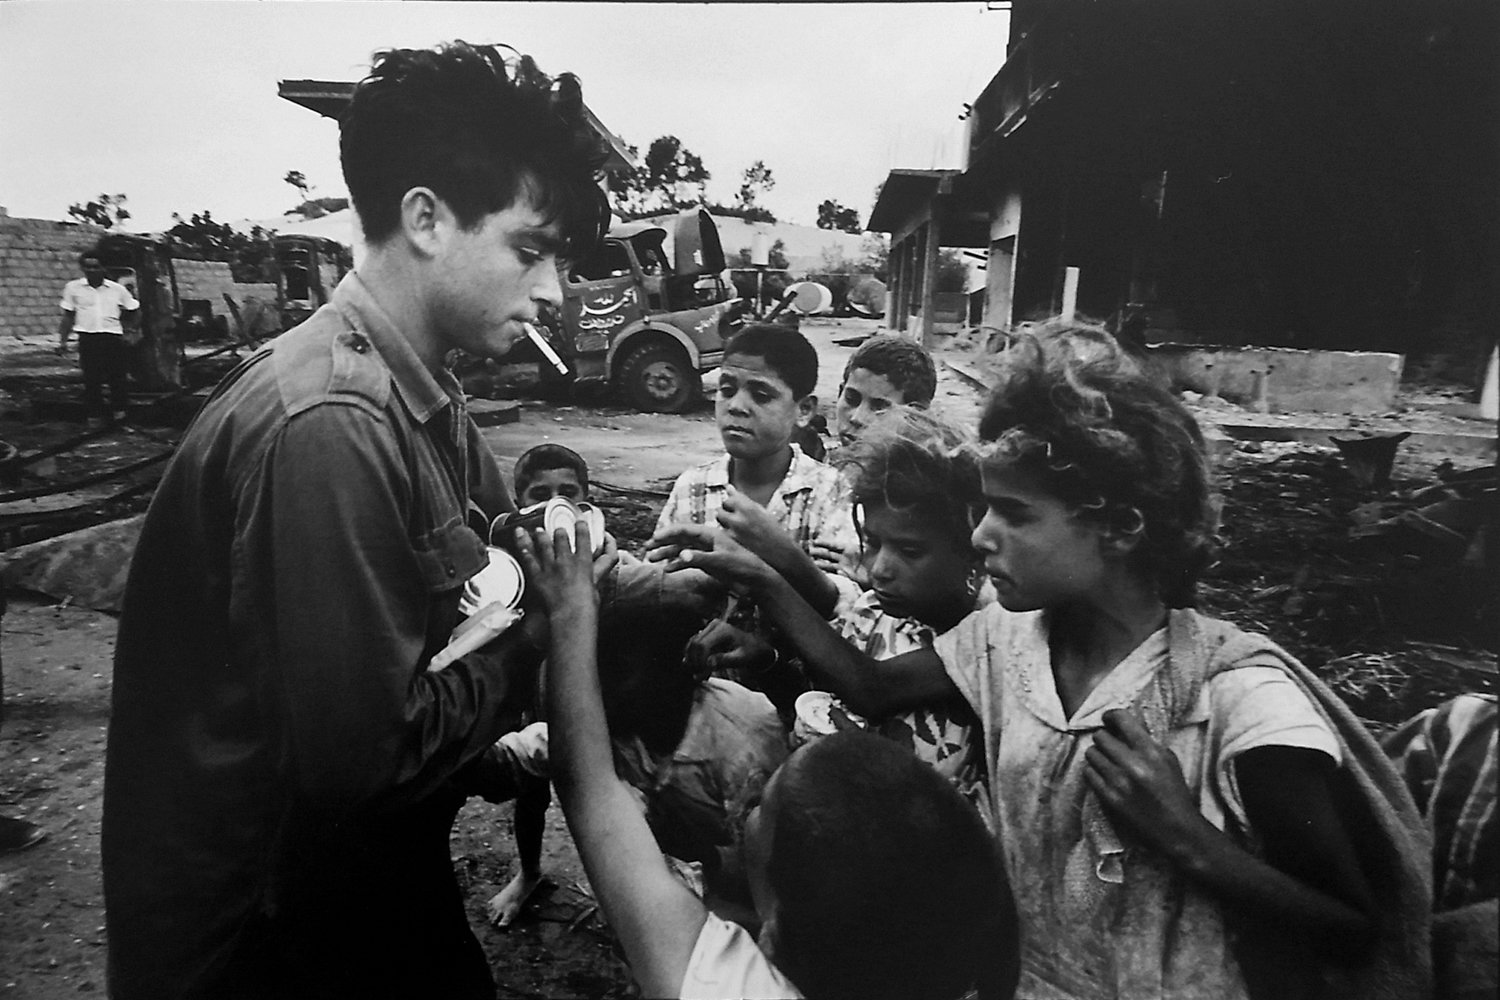 Leonard Freed’s 1968 photograph in a Gaza refugee camp is included in the exhibition ‘Leonard Freed: Israel Magazine 1967-1968,’ on display at the Hebrew Home at Riverdale’s Derfner Judaica Museum through Jan. 5.